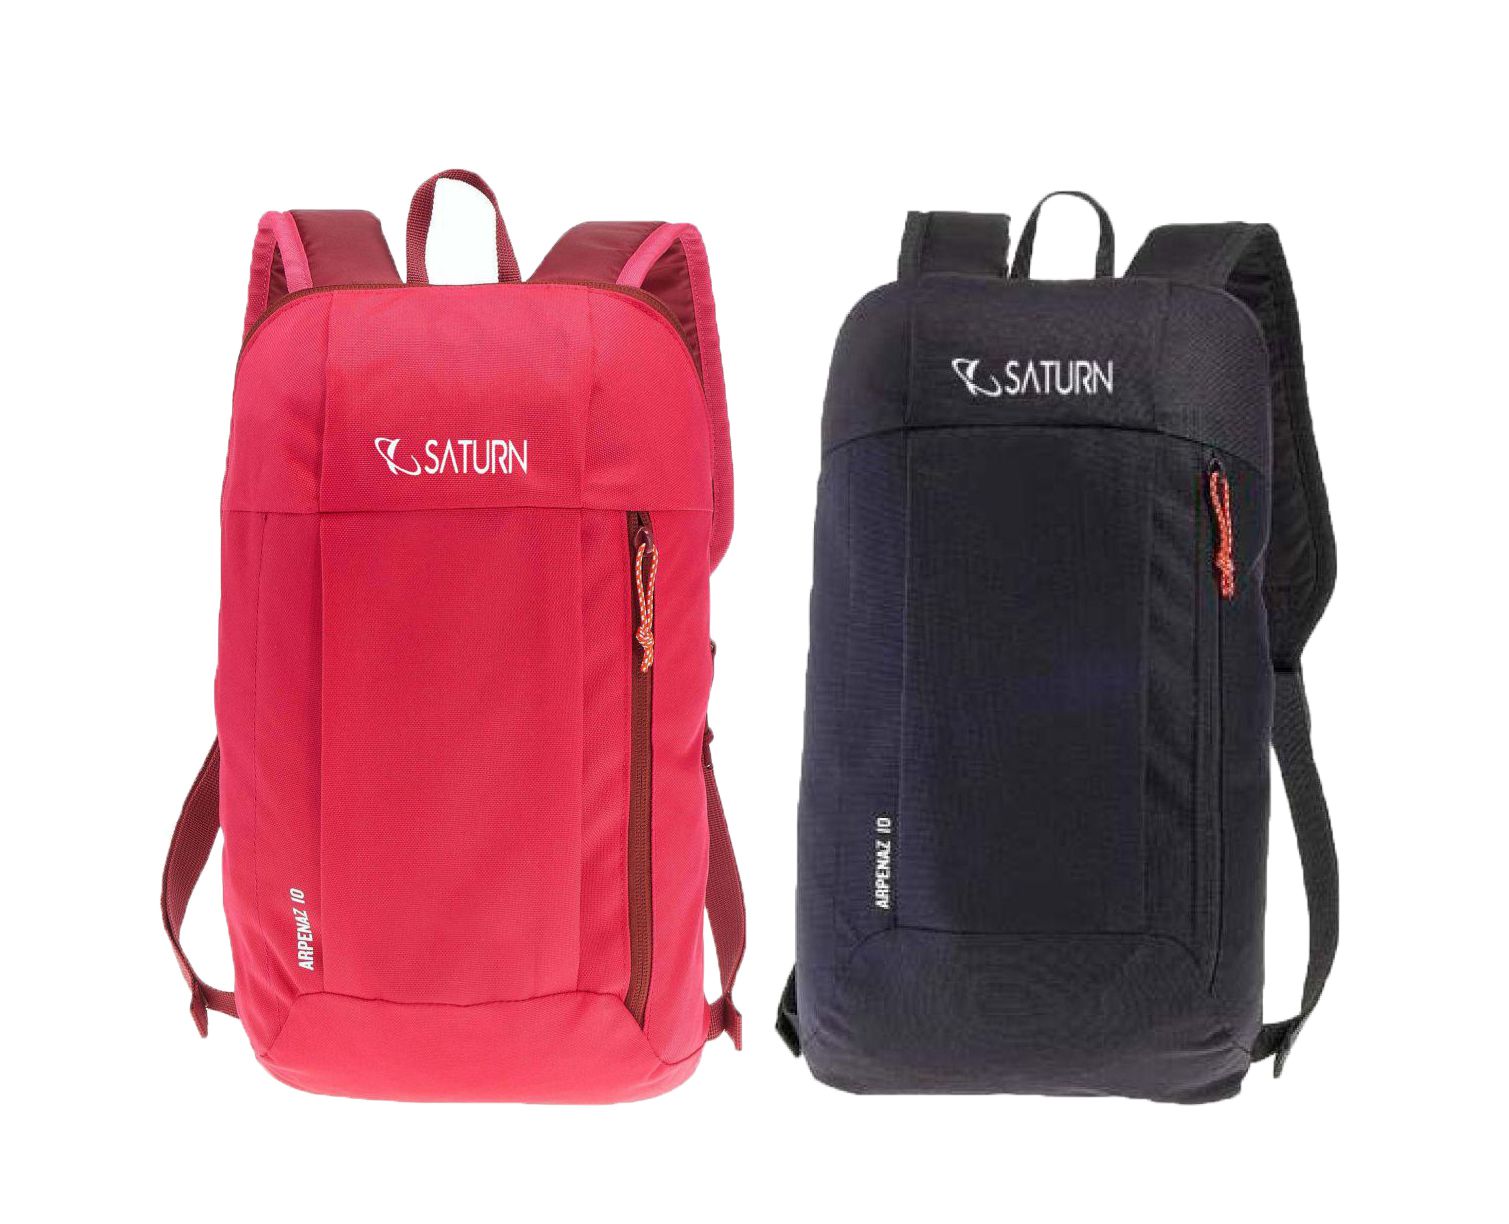     			Saturn New Generation Style School Bags Pack Of 2(Red and Black)